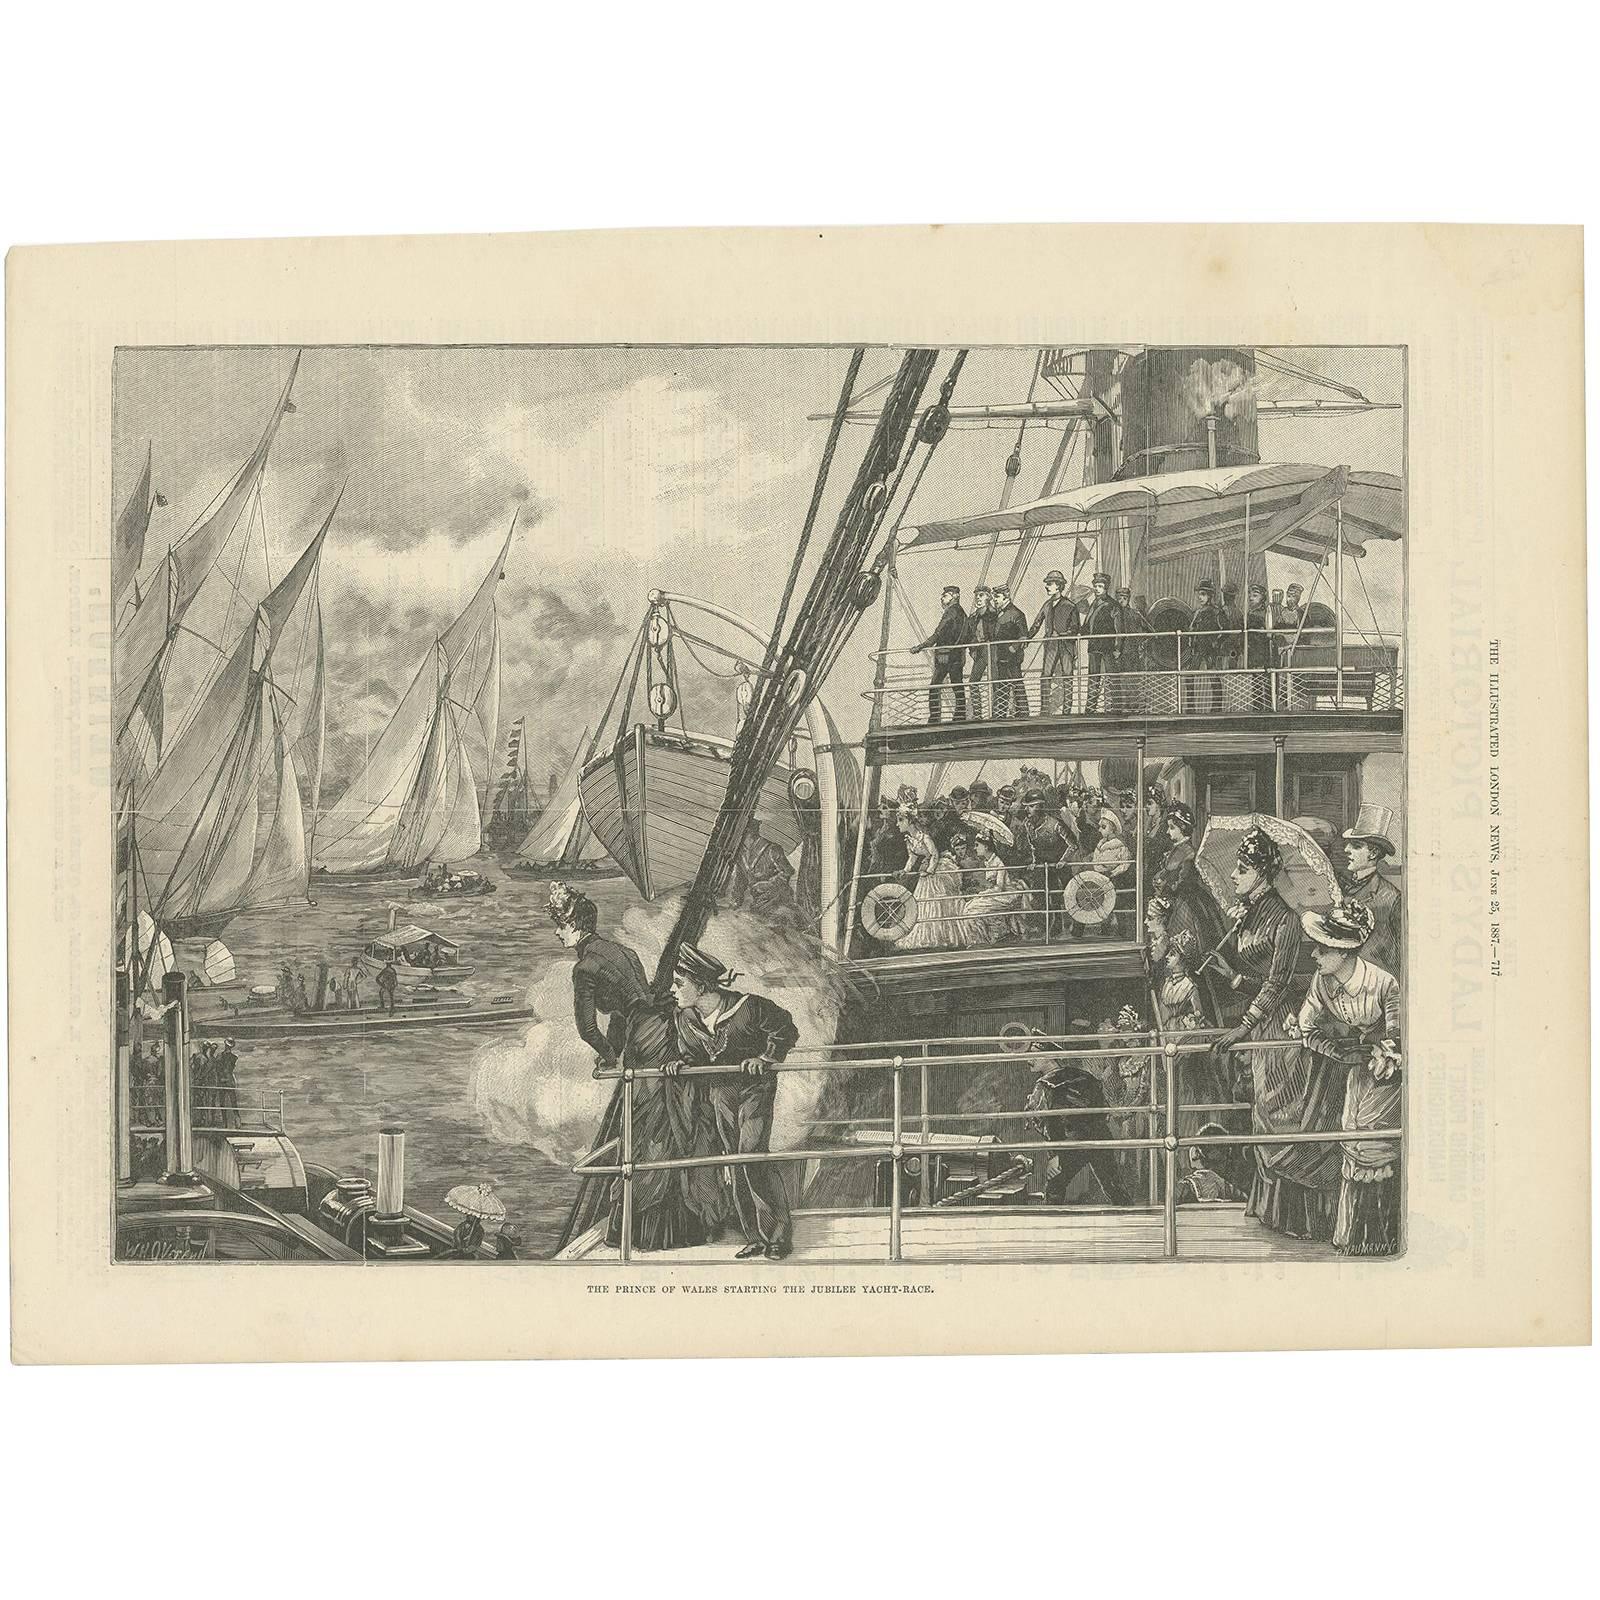 Antique Print of the Prince of Wales Starting the Jubilee Yacht-Race, 1887